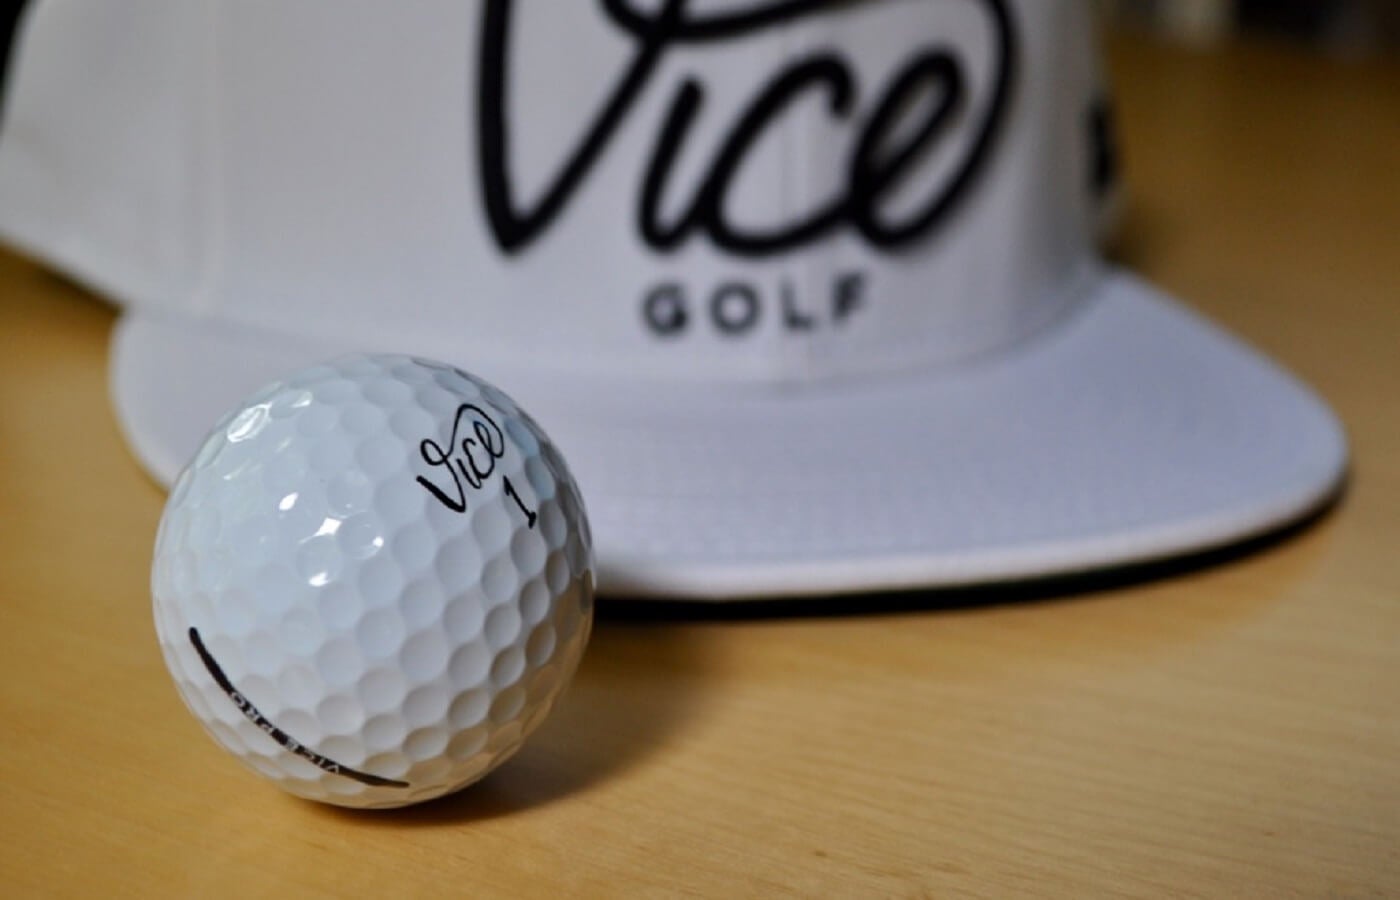 Vice golf logo hat and Vice golf ball on a table